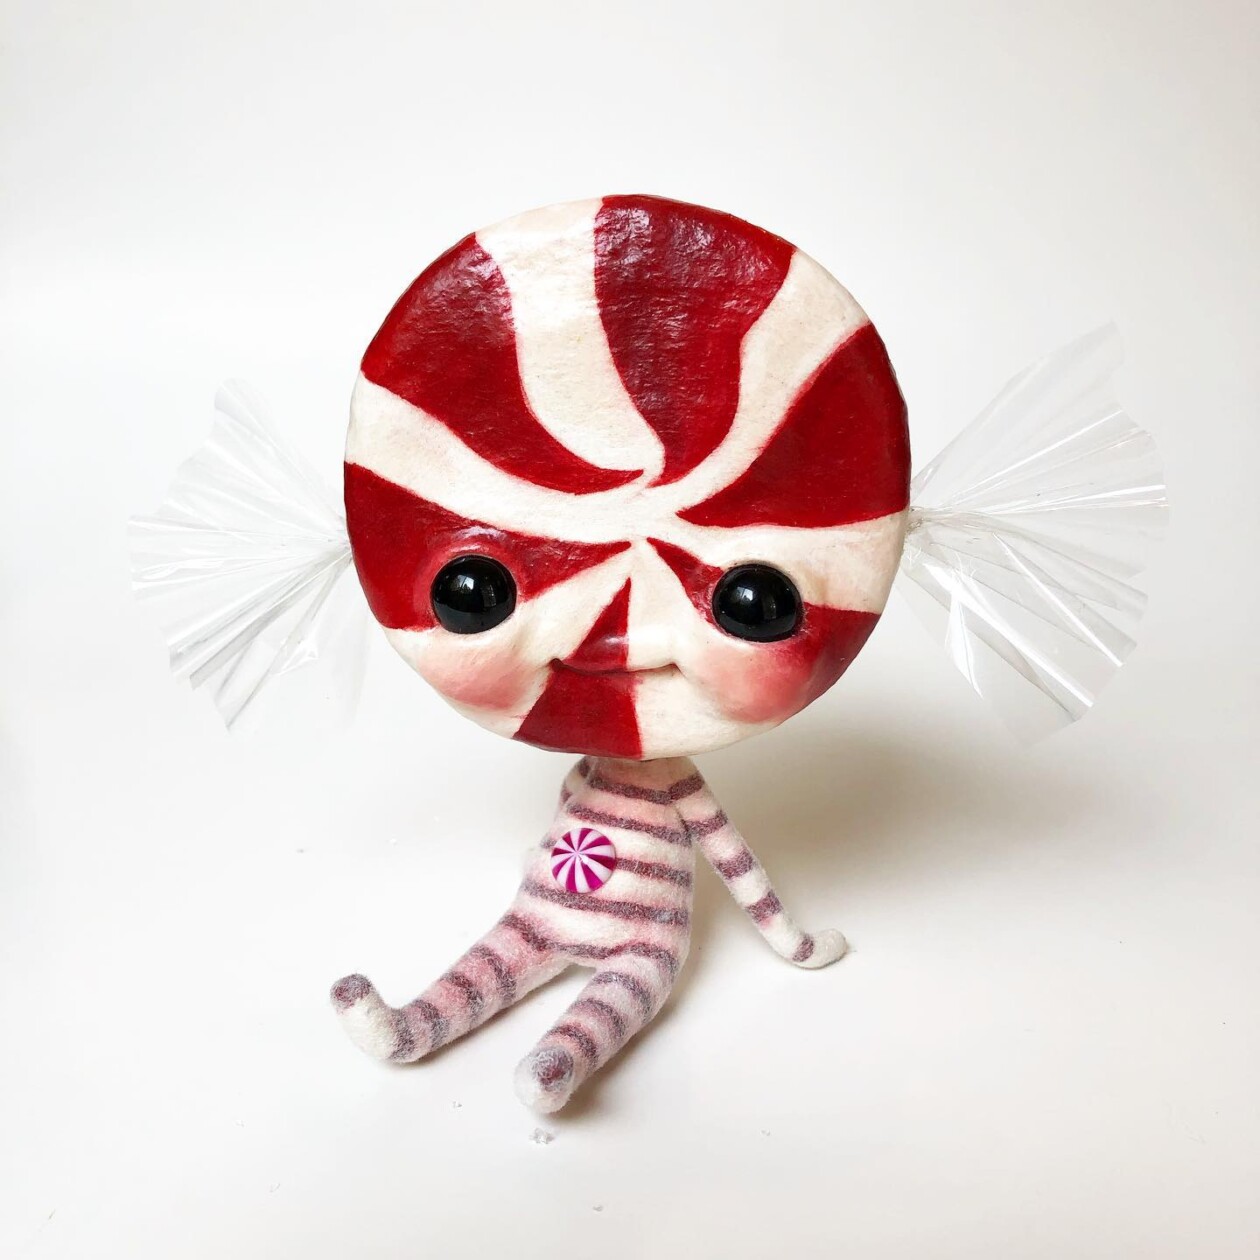 Cute And Creepy Little Monster Toys By Sara Duarte (10)